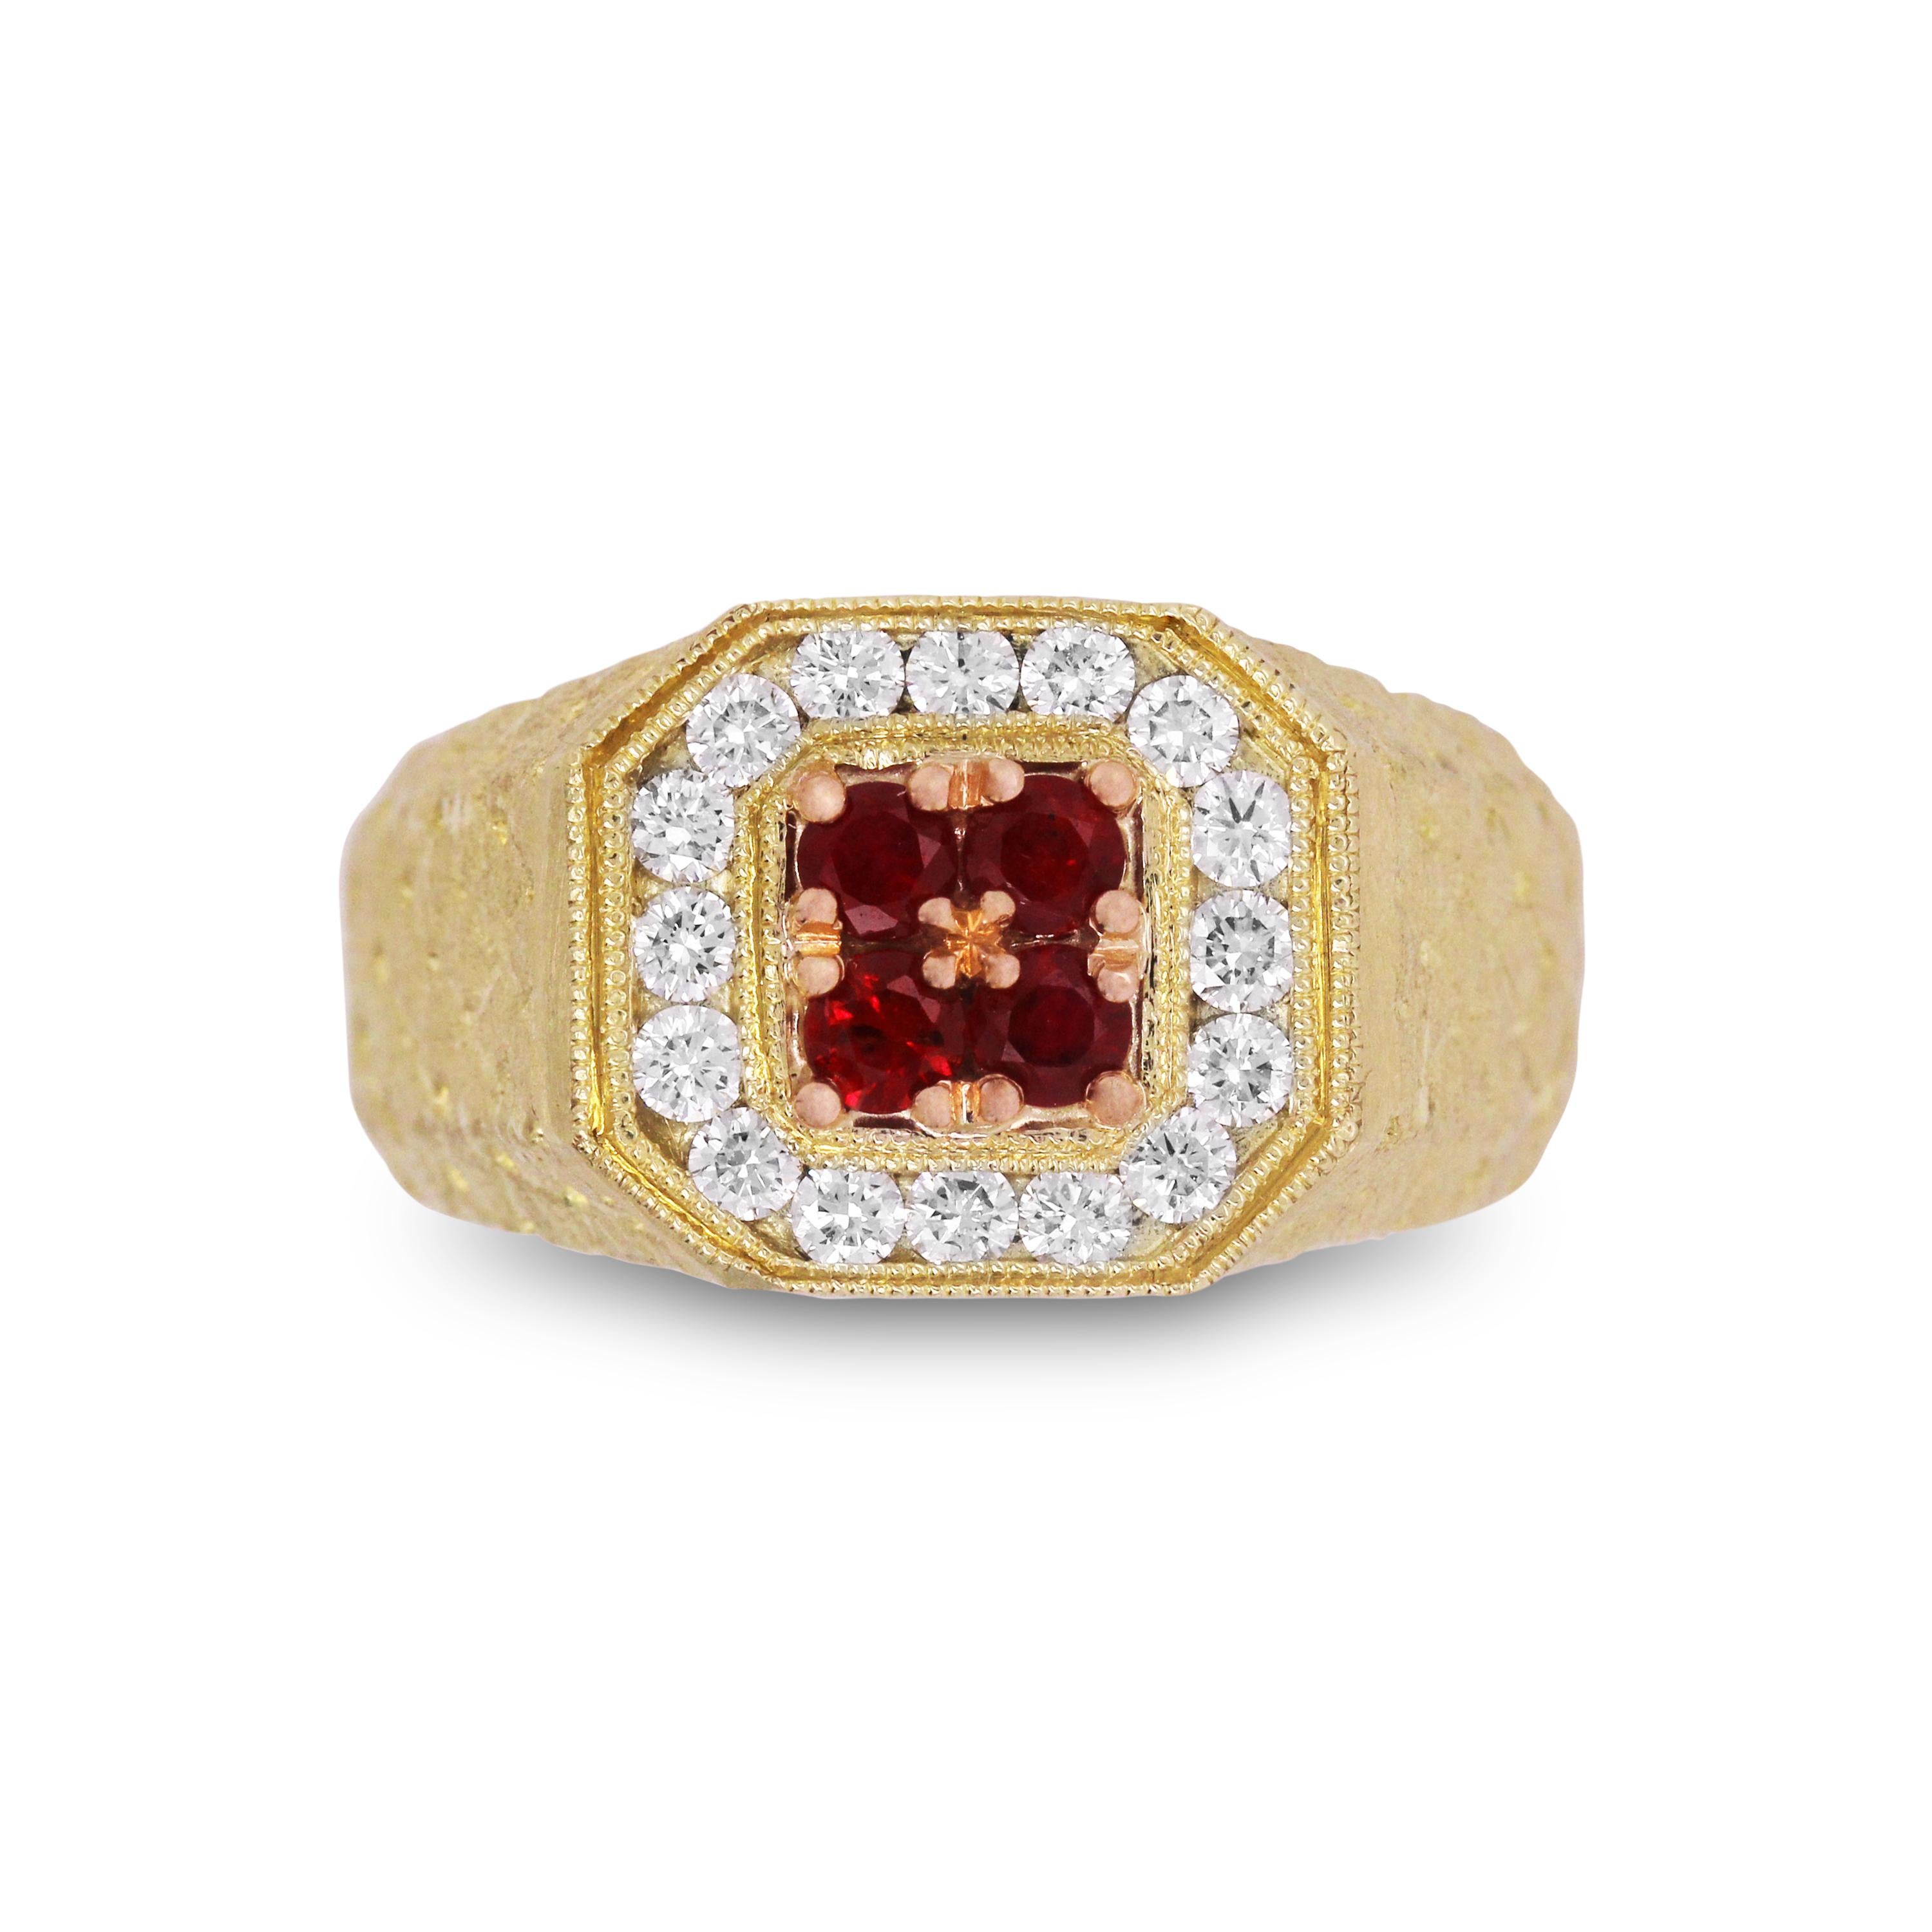 18K Yellow Gold Mens Ring with Diamonds and Rubies by Stambolian

This mens ring from Stambolian features textured, brushed gold finish on both sides and the center is rubies surrounded by diamonds

0.56 carat G color, VS clarity diamonds 

Four